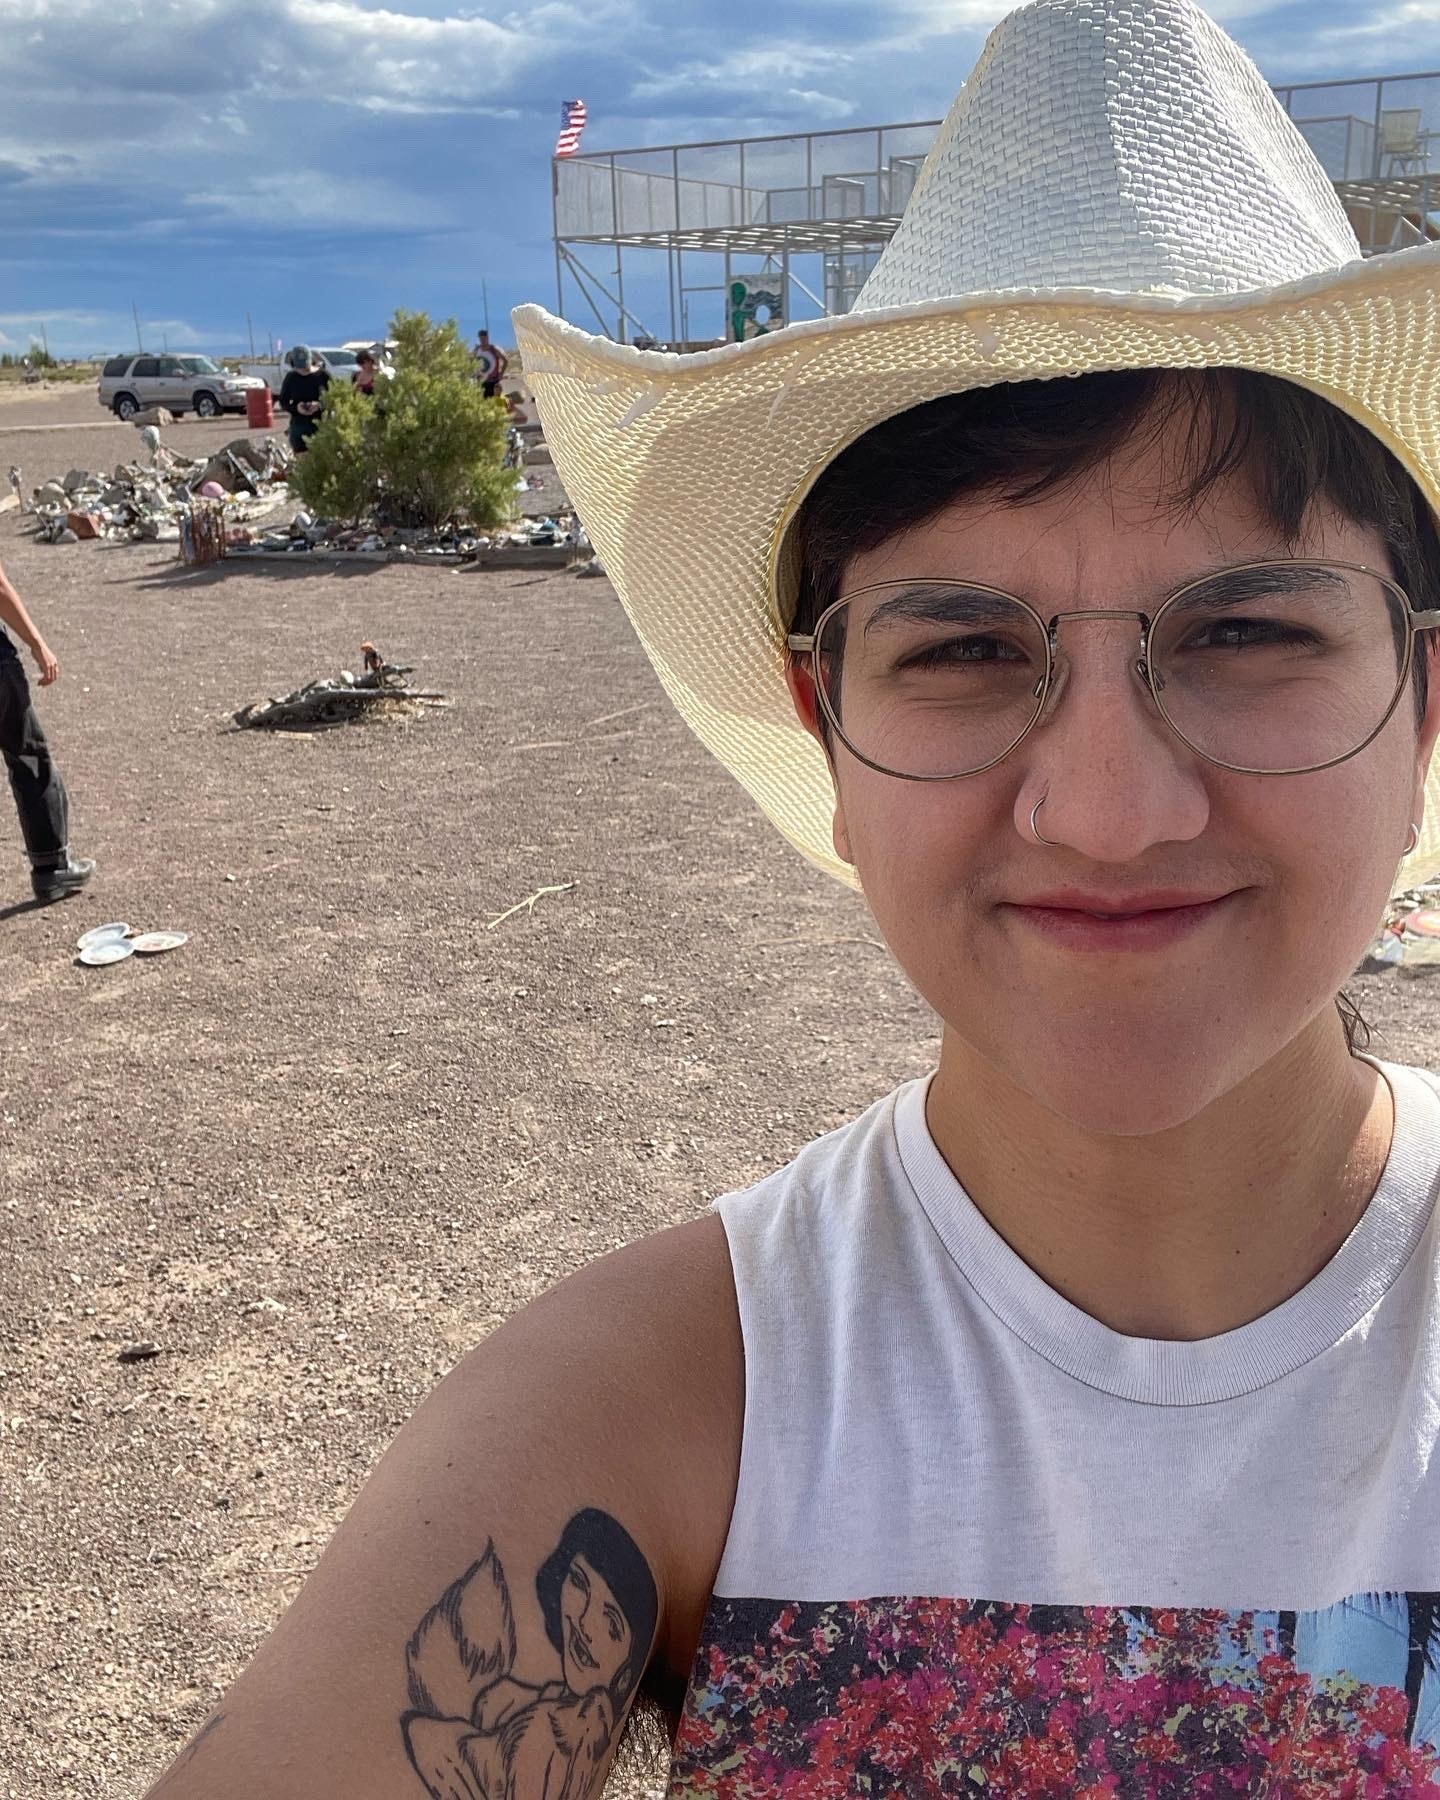 A transmasculine person takes a selfie in the desert.